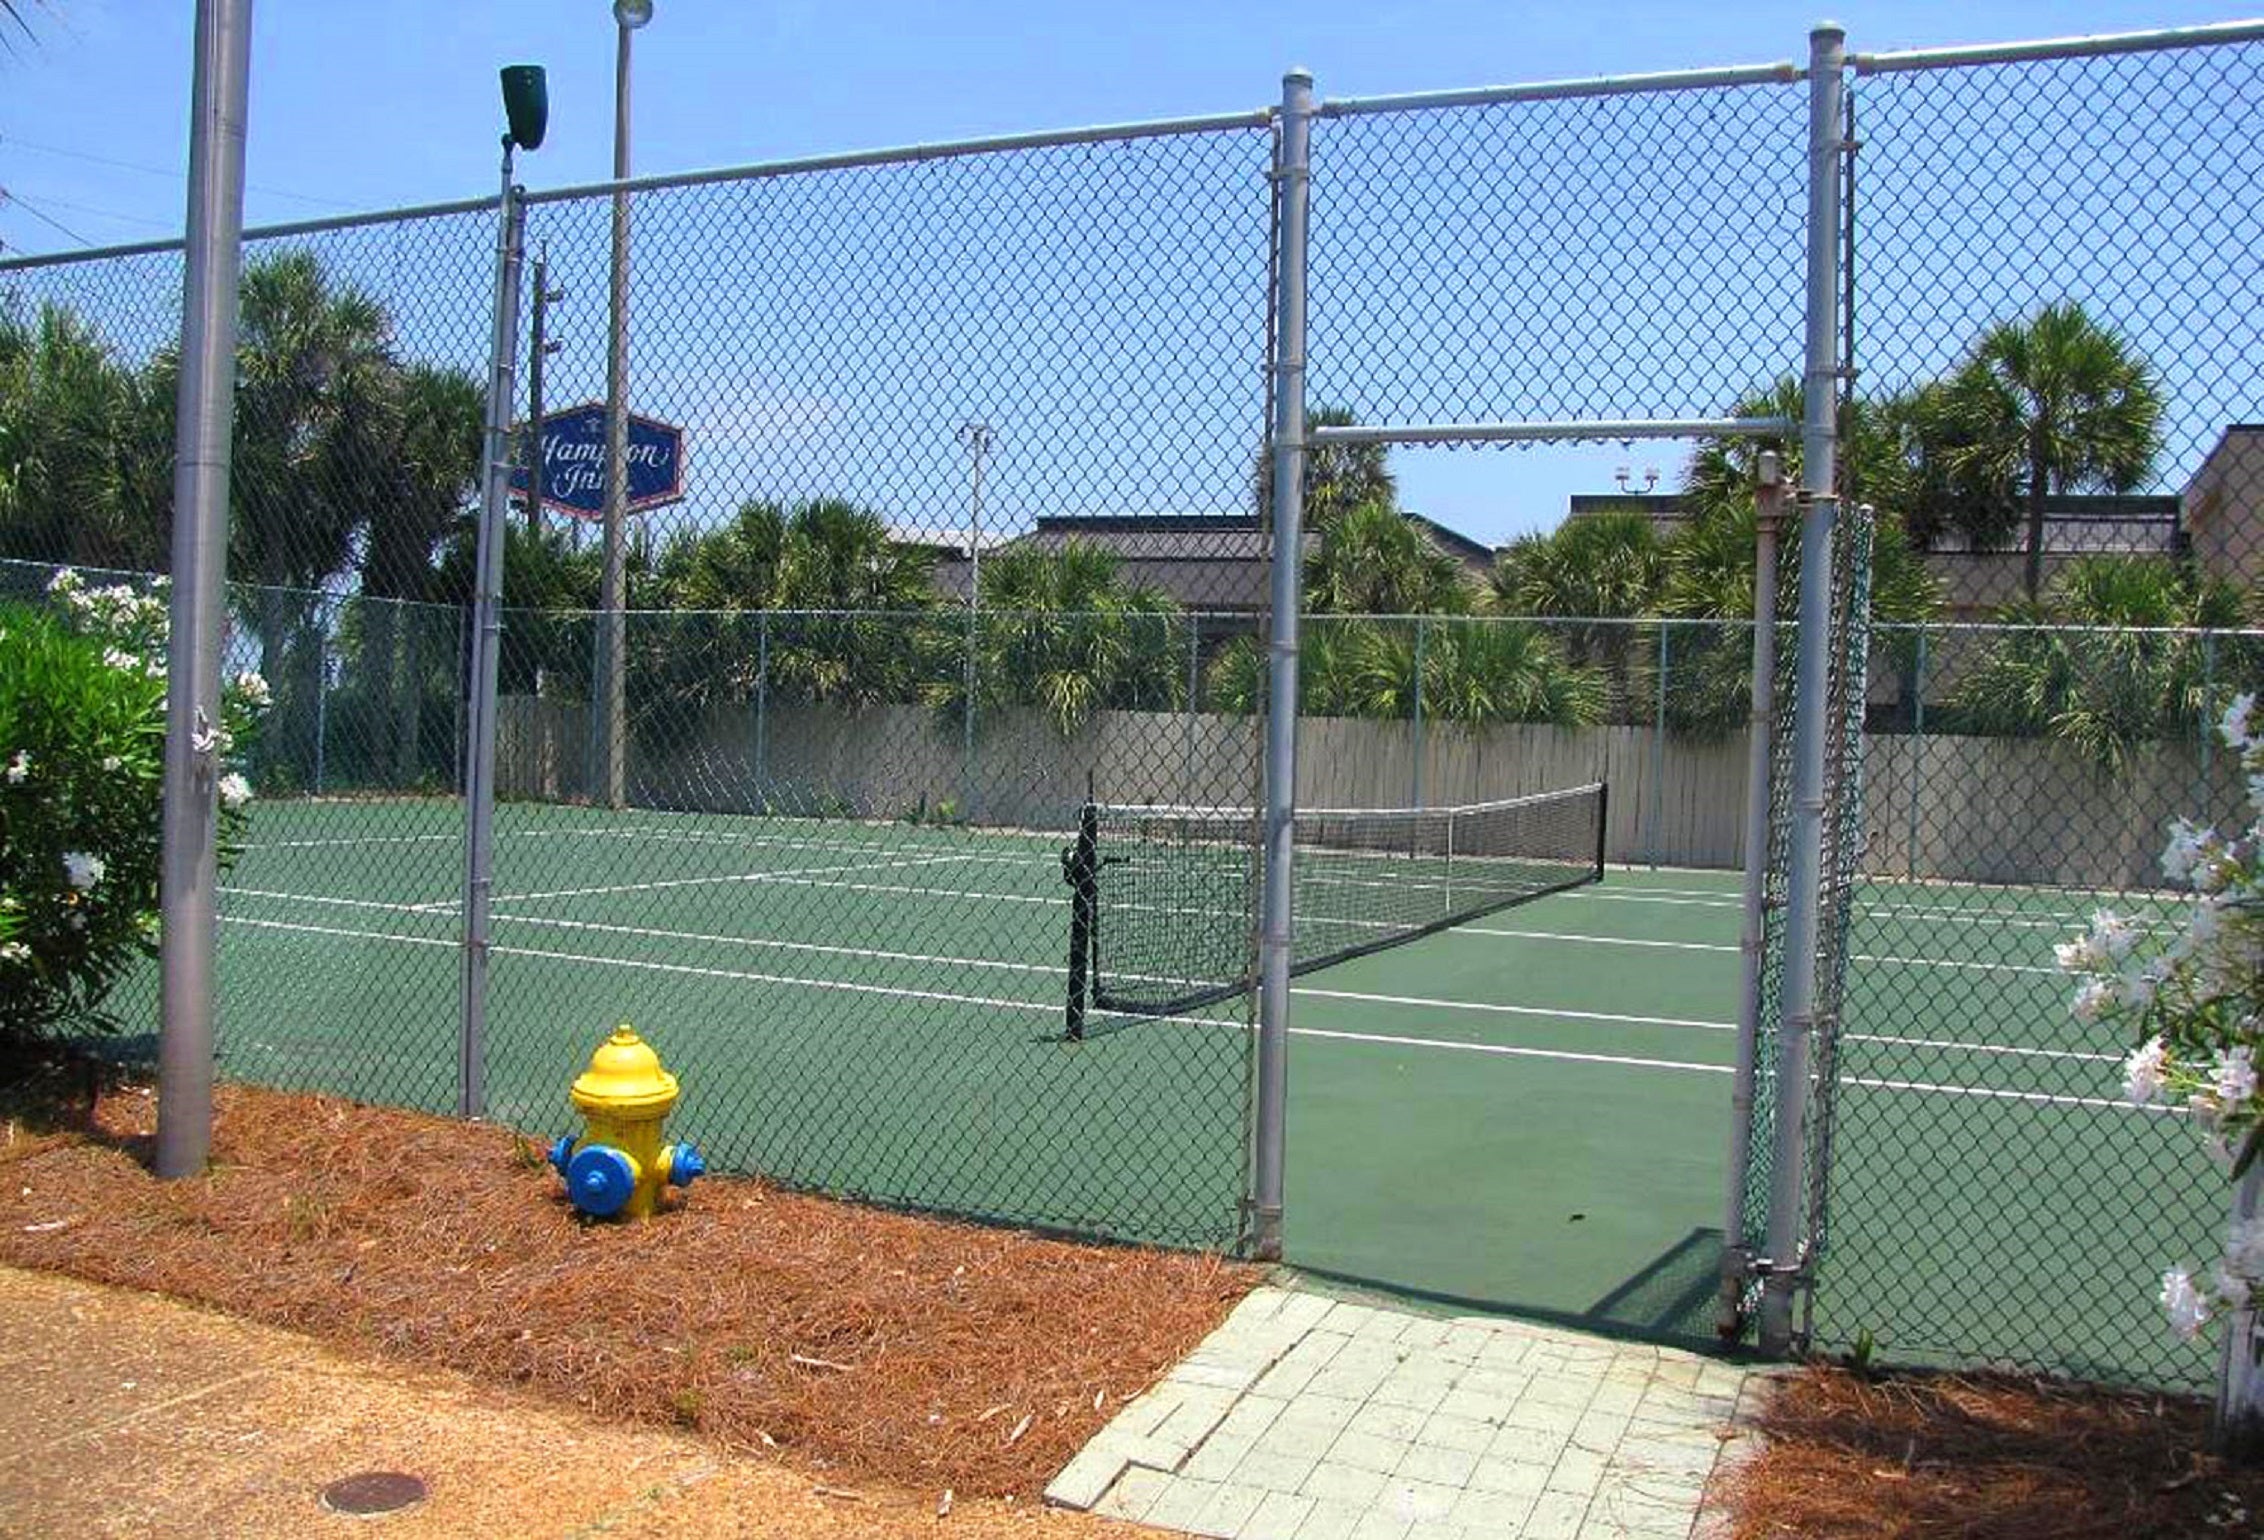 Tennis Courts (currently closed)